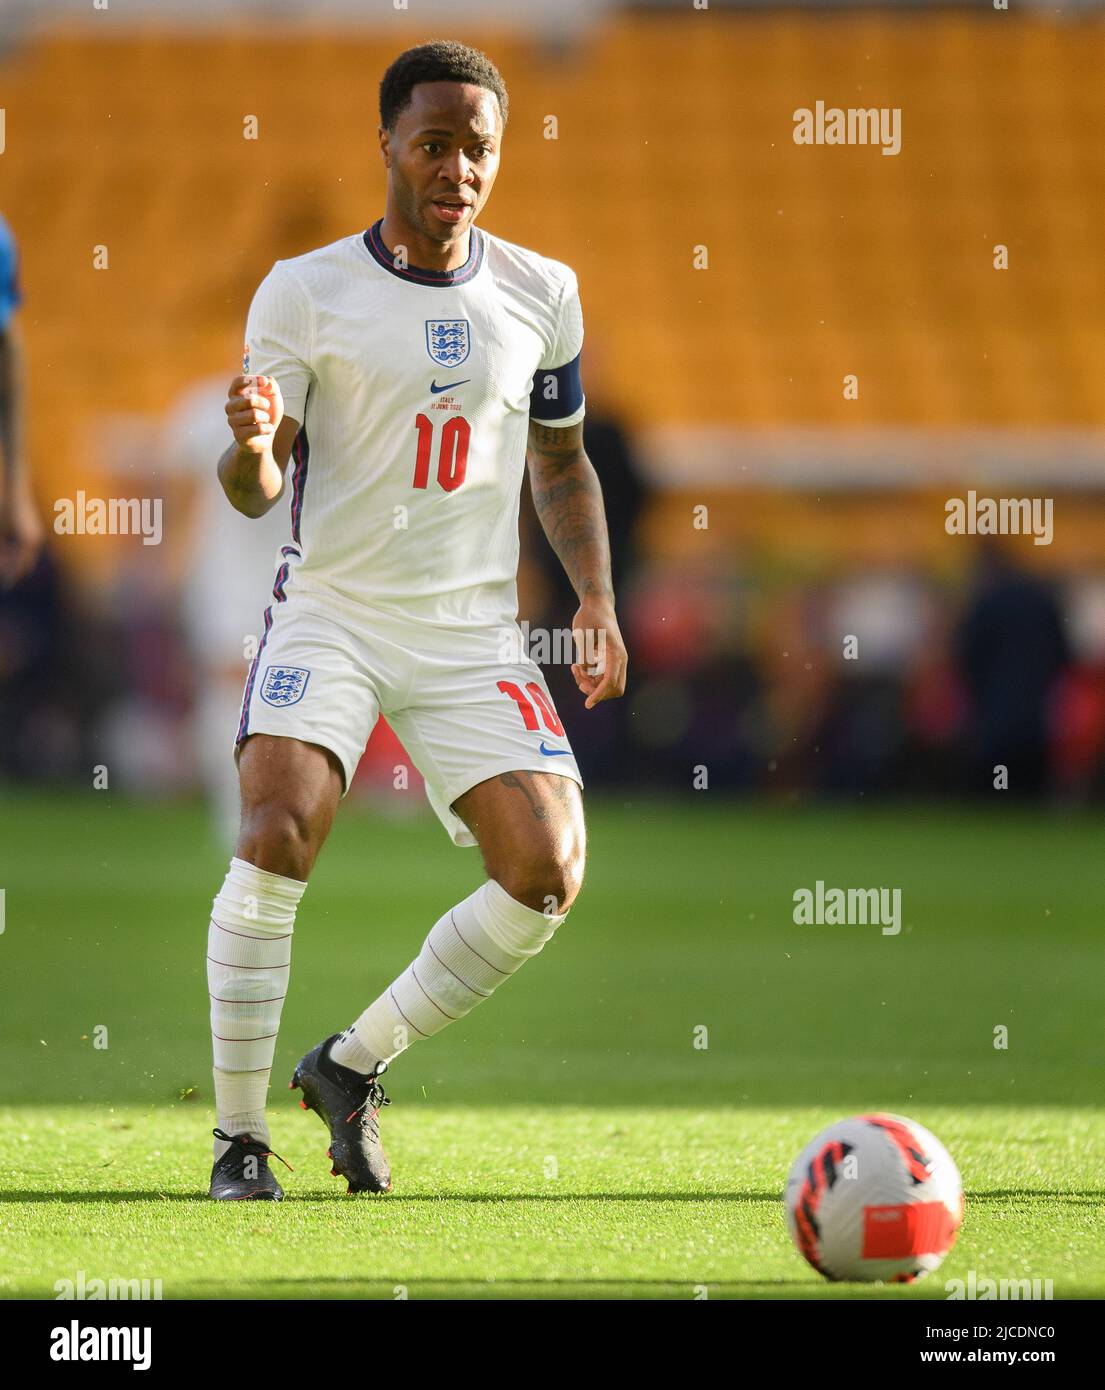 11 Jun 2022 - England v Italy - UEFA Nations League - Group 3 - Molineux Stadium  Raheem Sterling during the match against Italy. Picture Credit : © Mark Pain / Alamy Live News Stock Photo